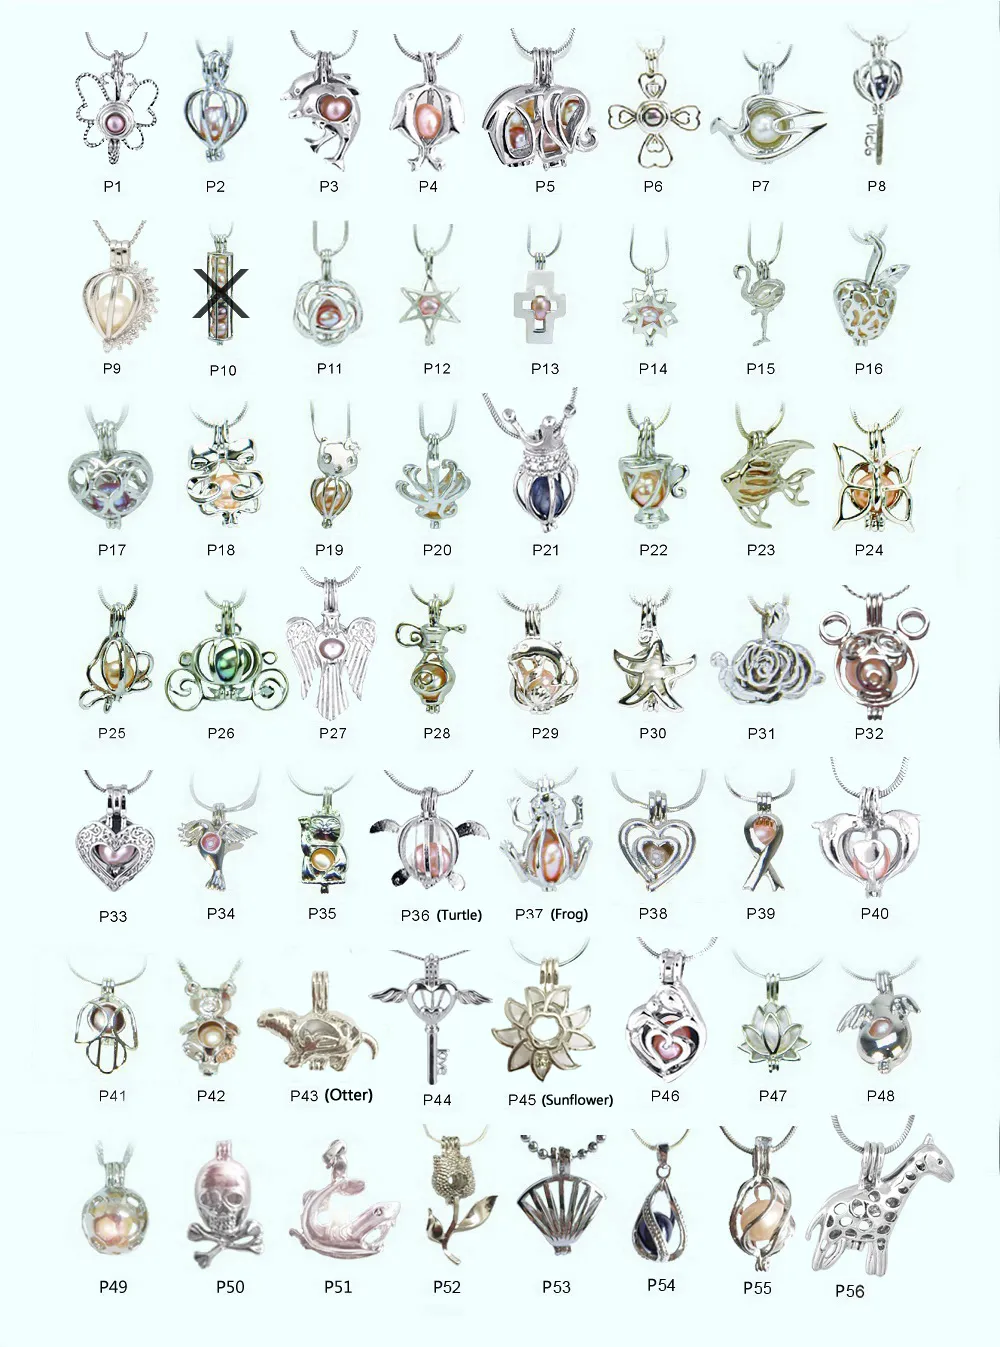 18kgp Fashion diy wish pearl/ gem beads locket cages, lovely charms pendant mountings wholesale 100pcs/lot (can mix different styles)